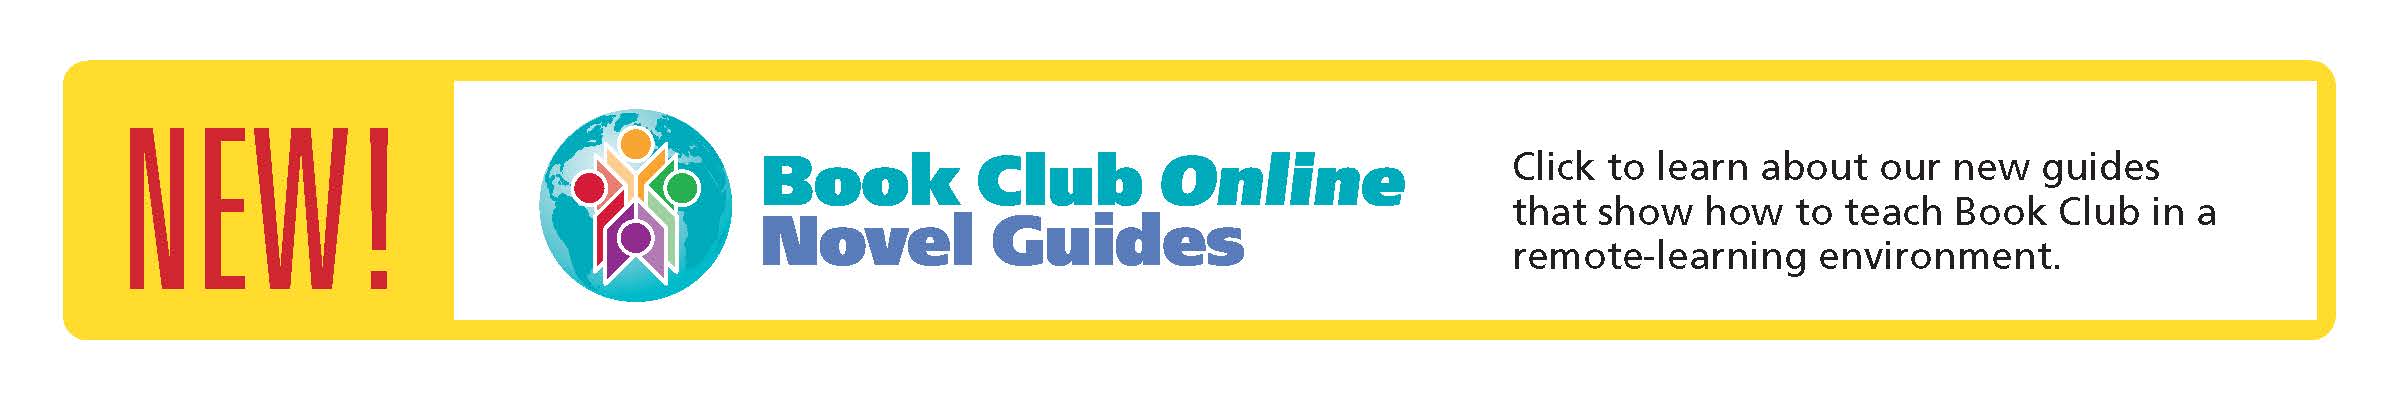 NEW! Book Club Online